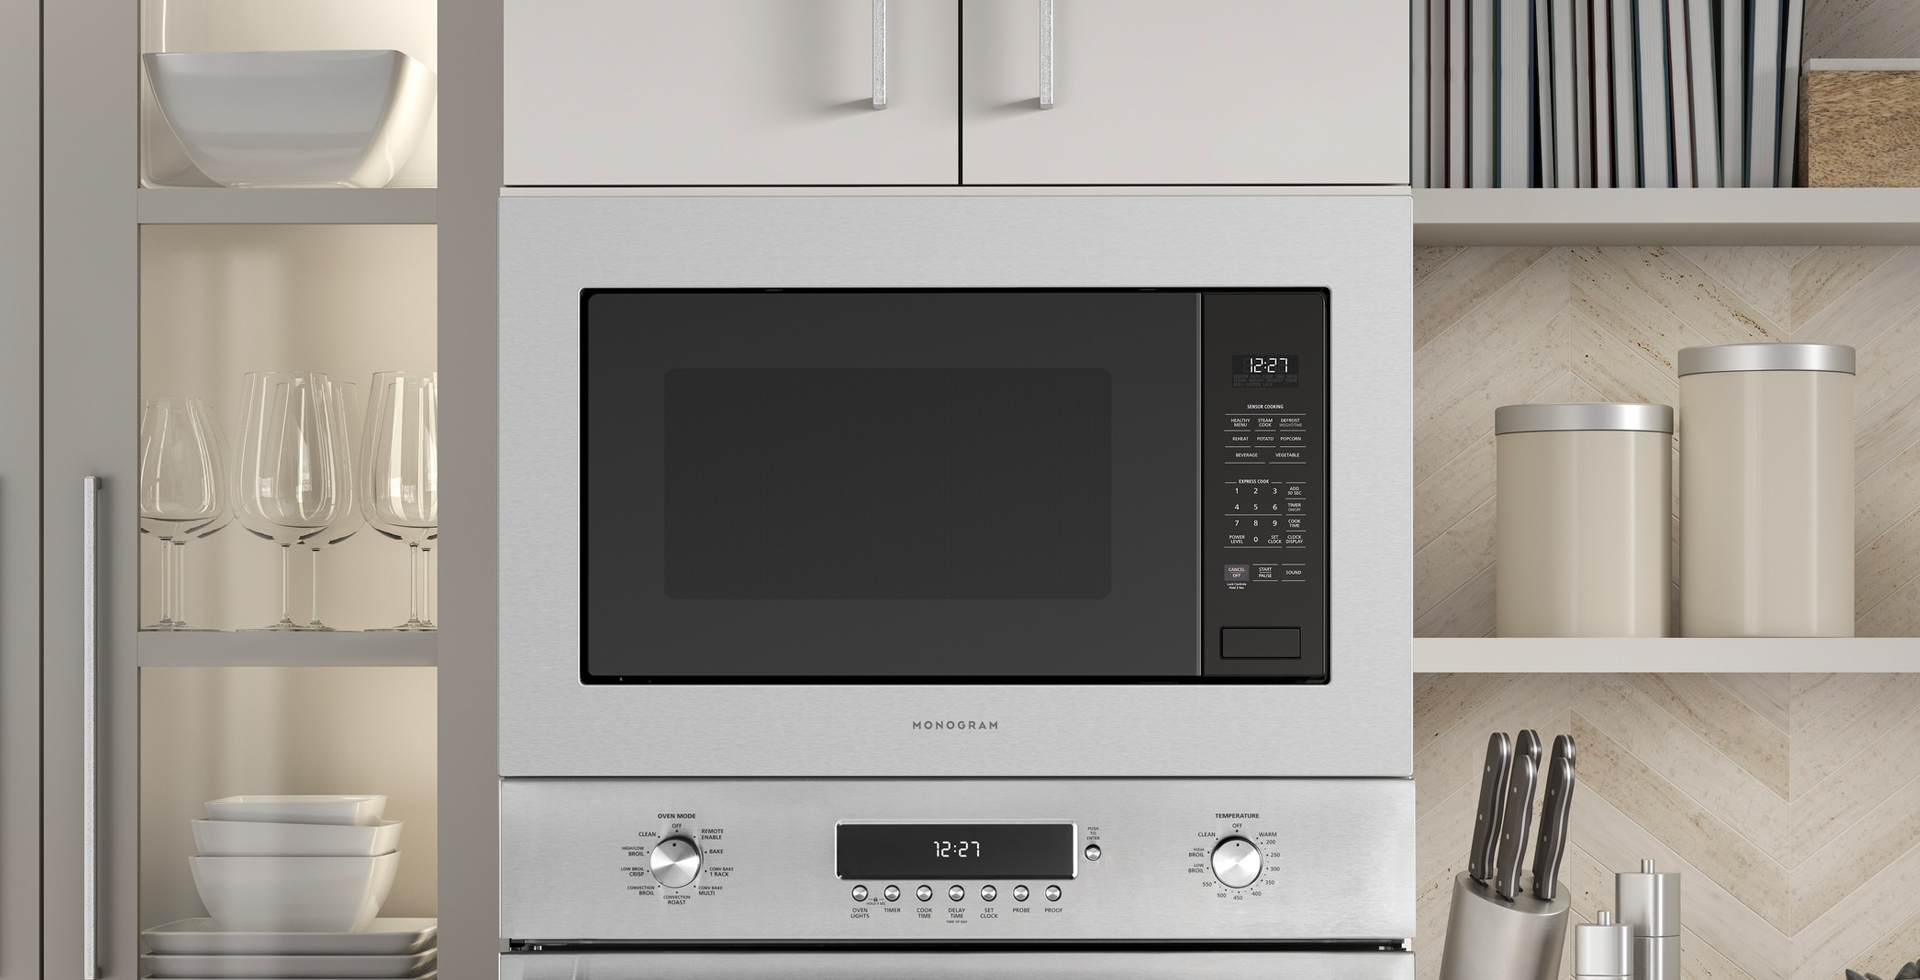 GE Monogram Microwave A Luxury Appliance For Your Kitchen